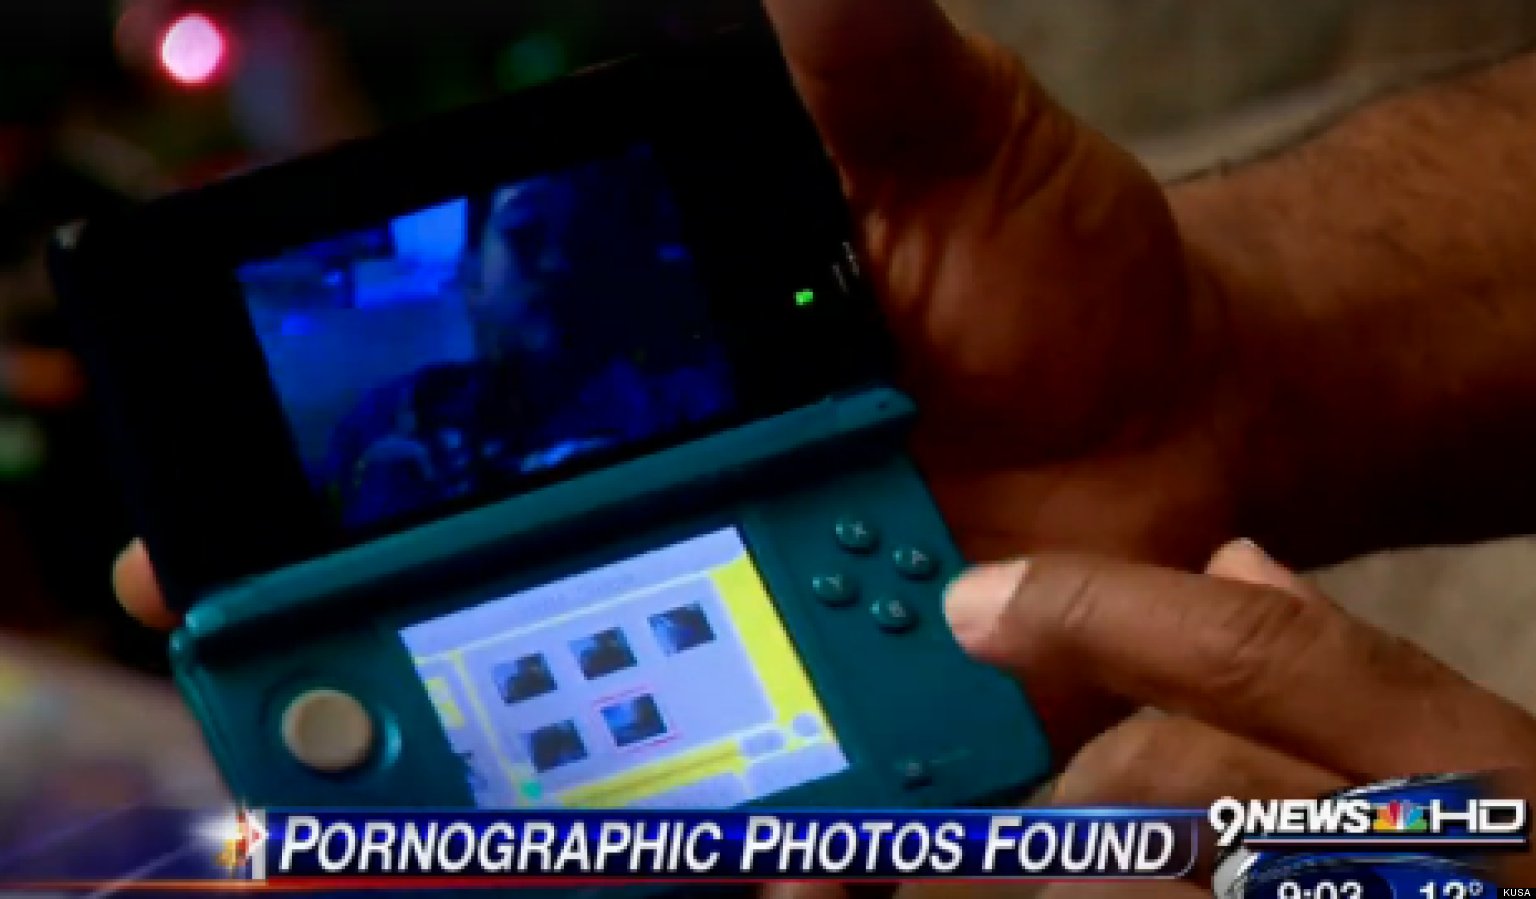 Nintendo 3ds Porn 5 Year Old Receives Refurbished Toy With Racy Photos